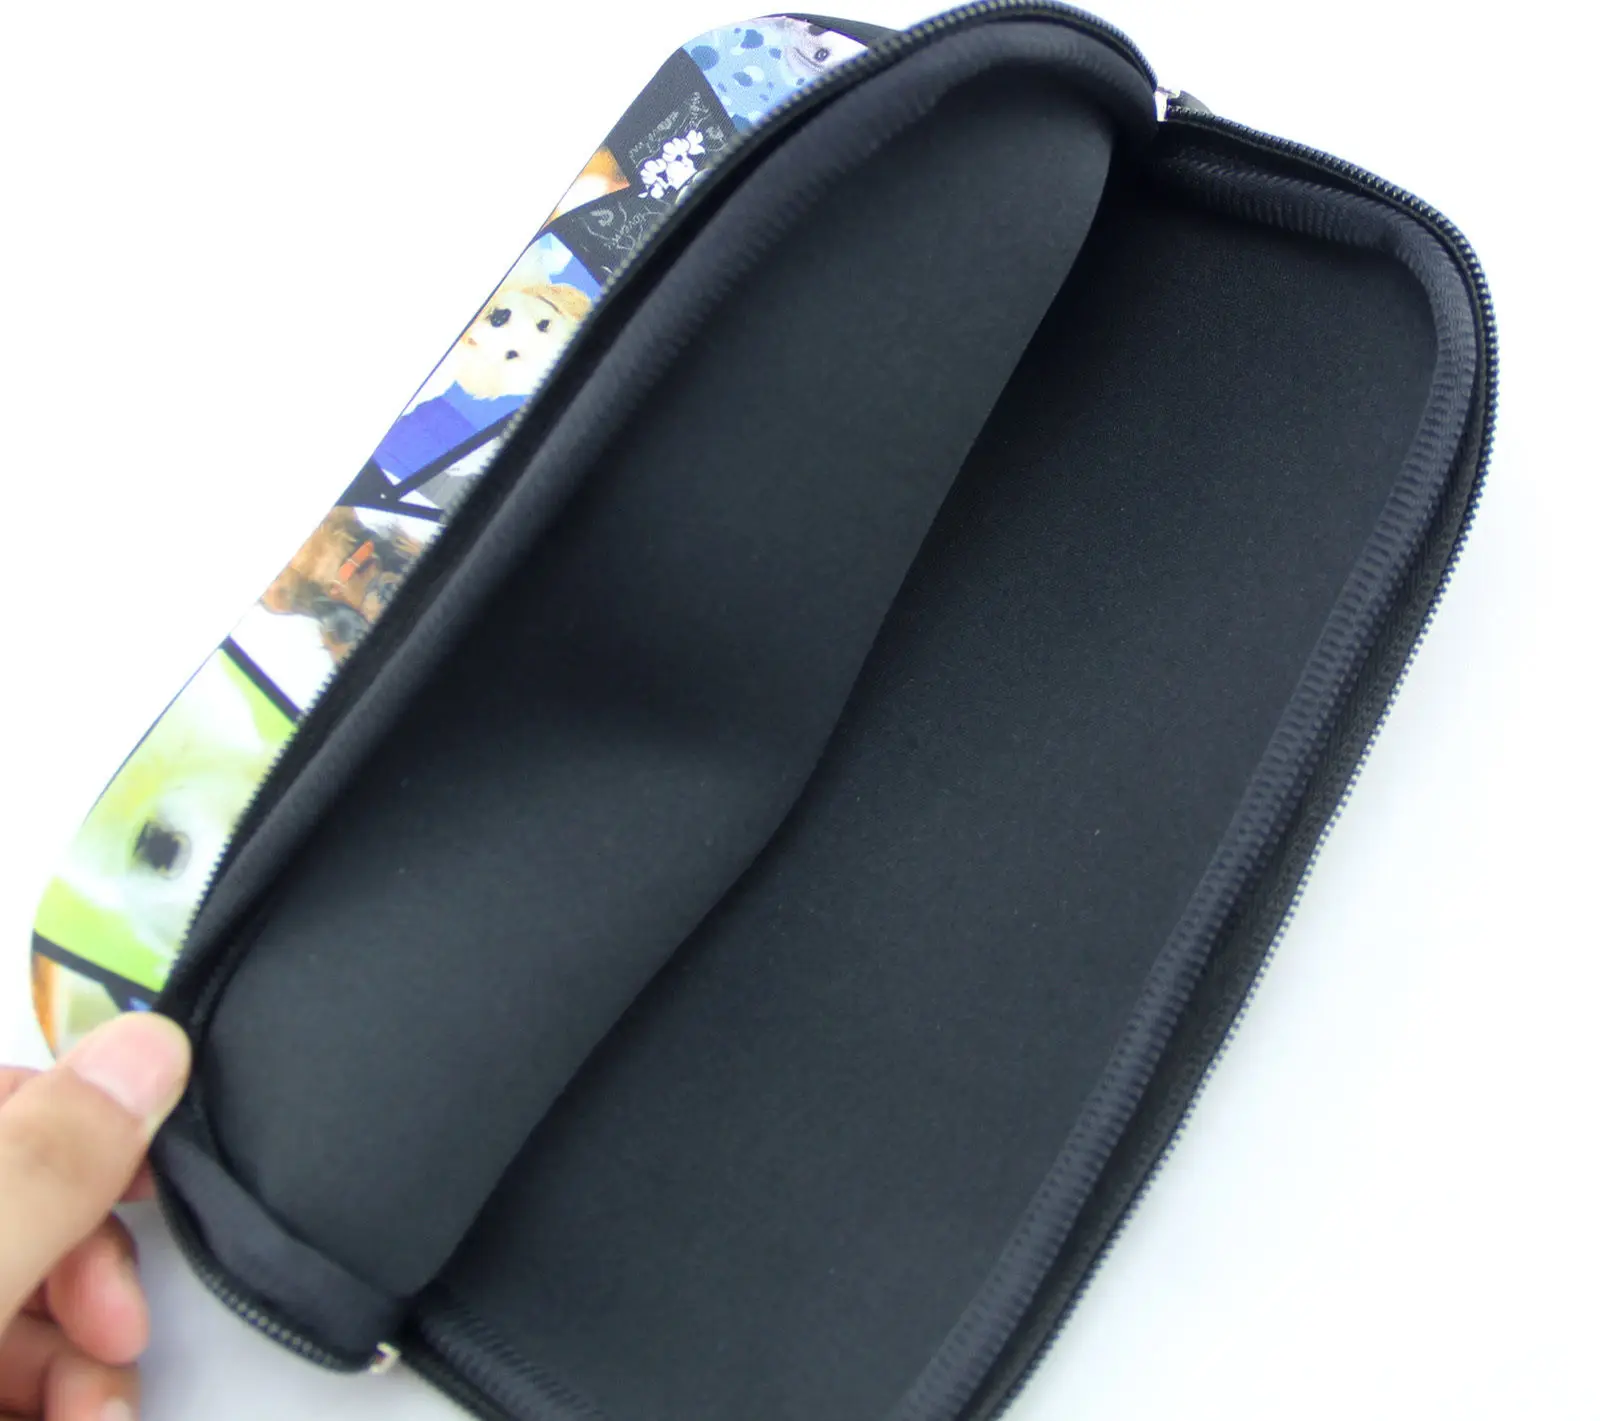 music laptop bag notebook sleeve case for macbook air pro 12 13 3 14 15 6 inch for 13 xiaomi lenovo dell acer tablet bags free global shipping